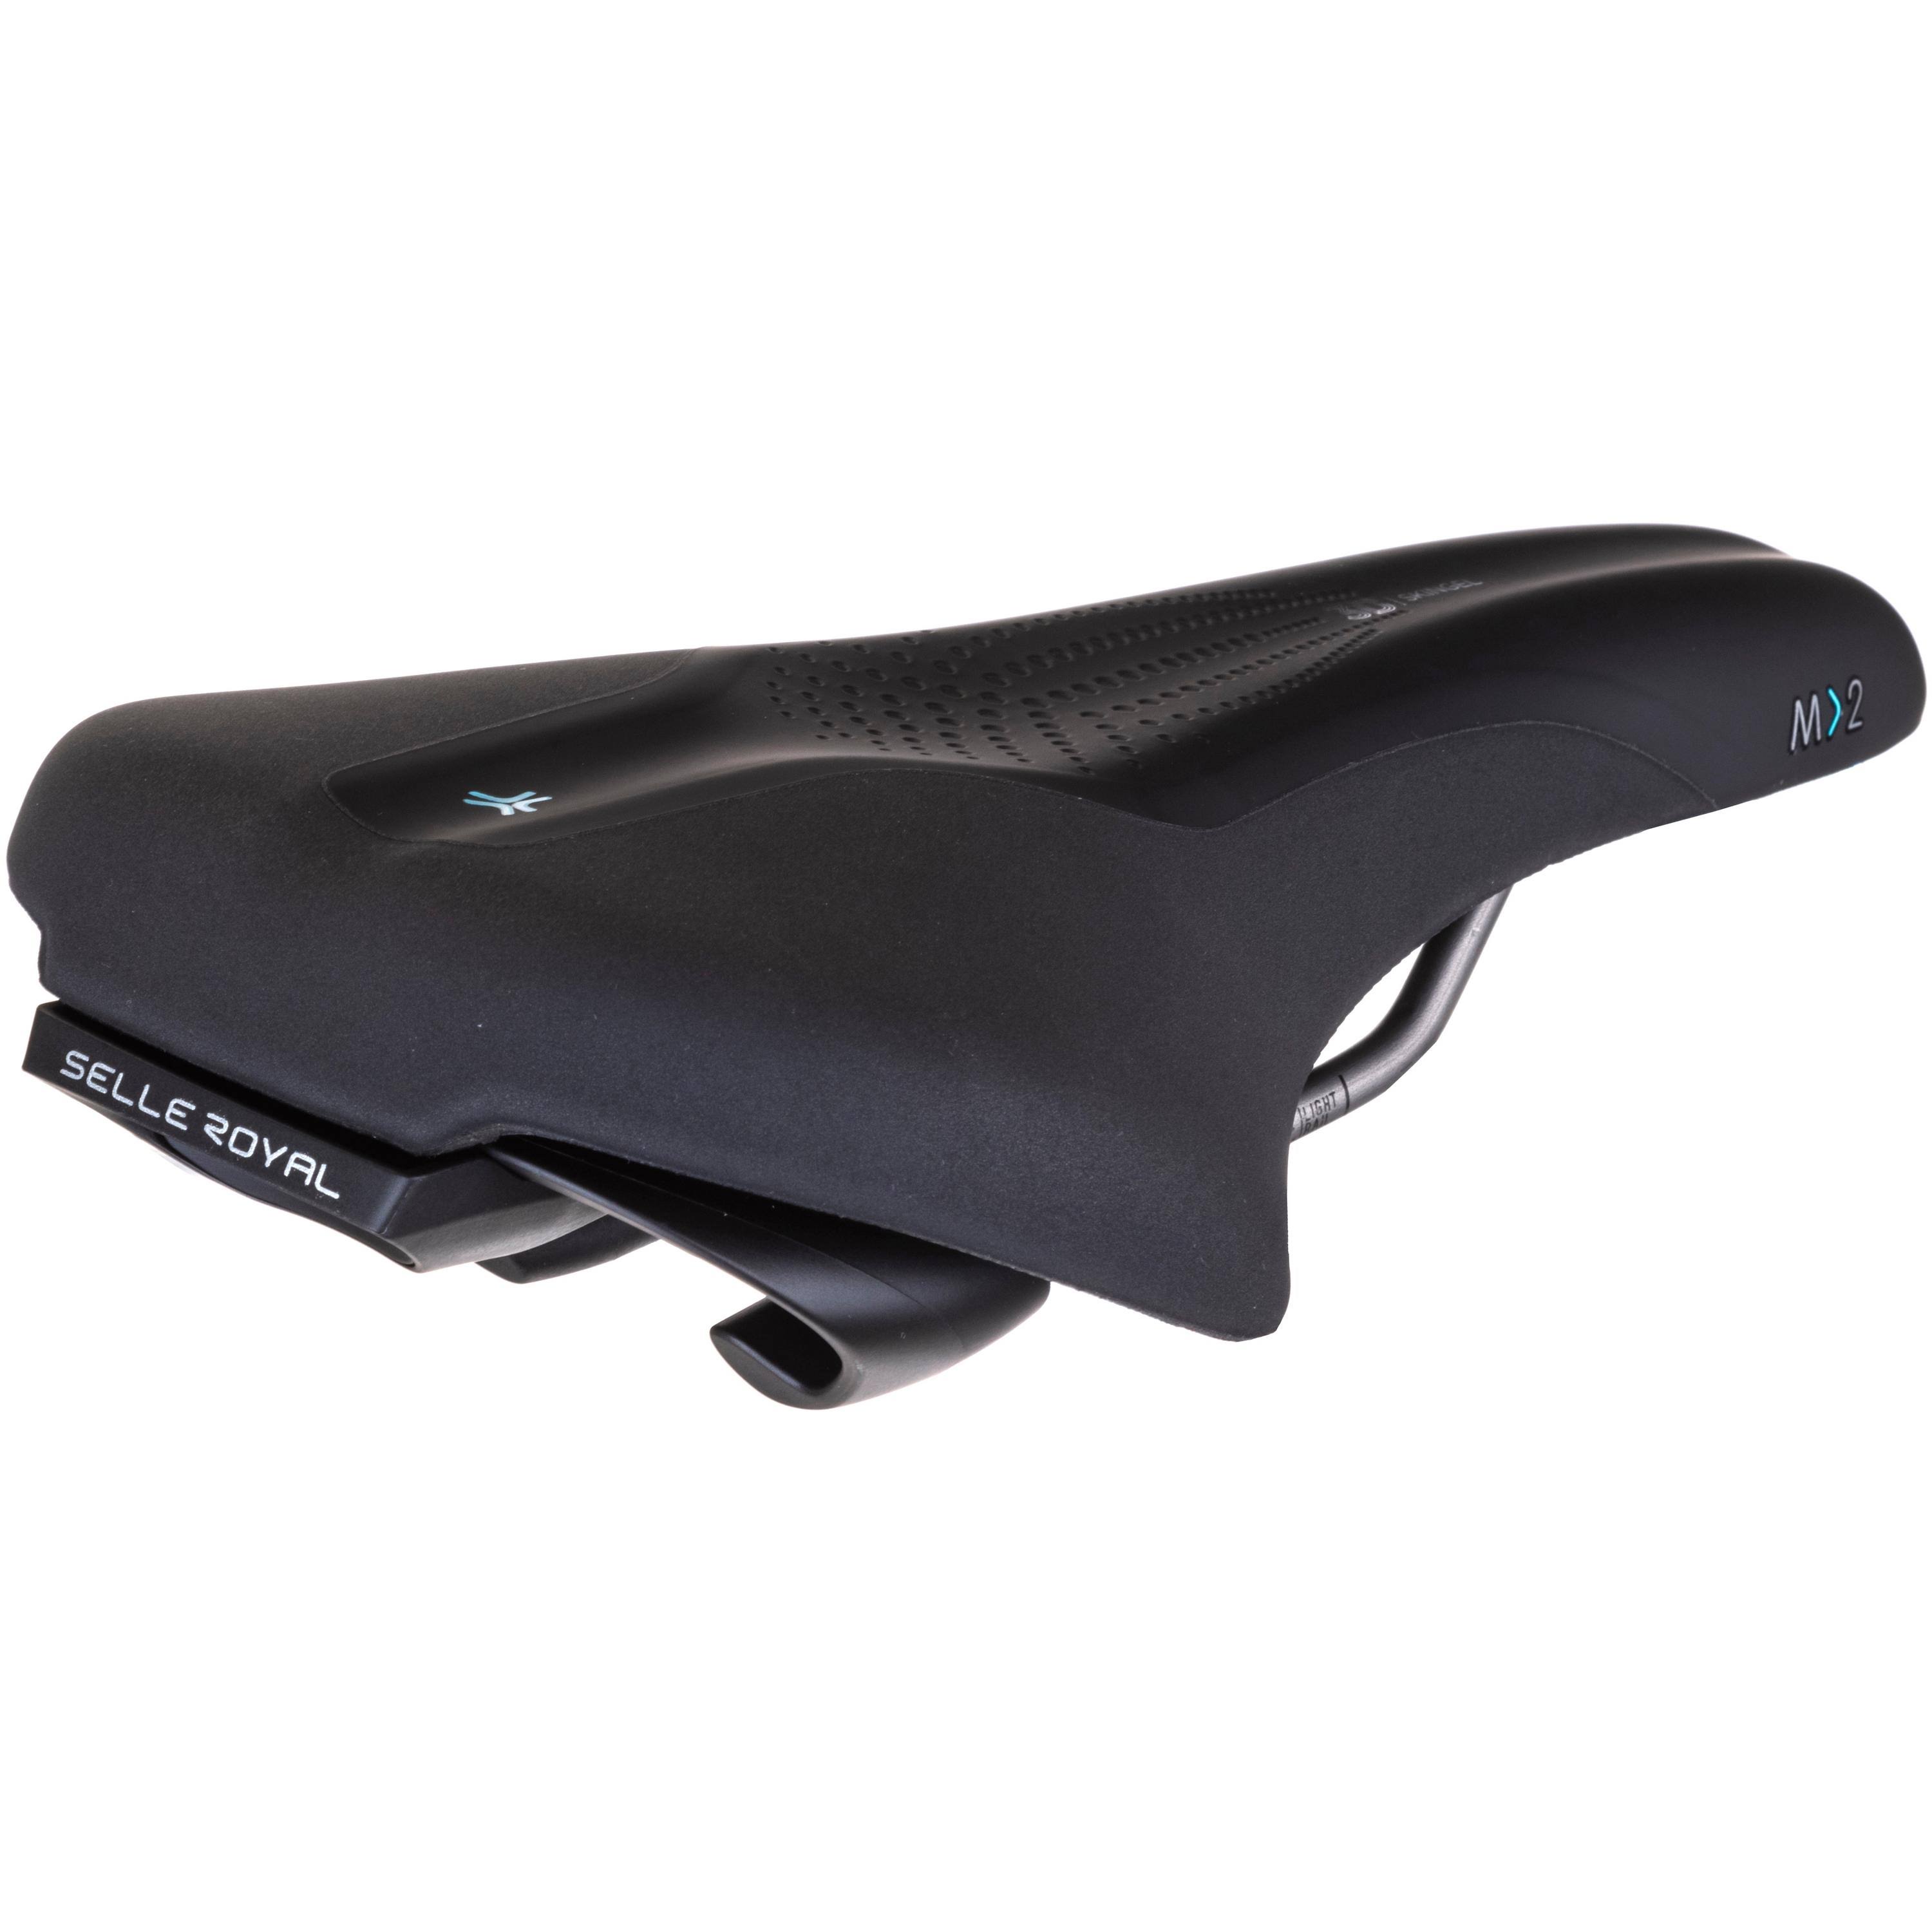 Selle Royal Scientia M1 Moderate Saddle